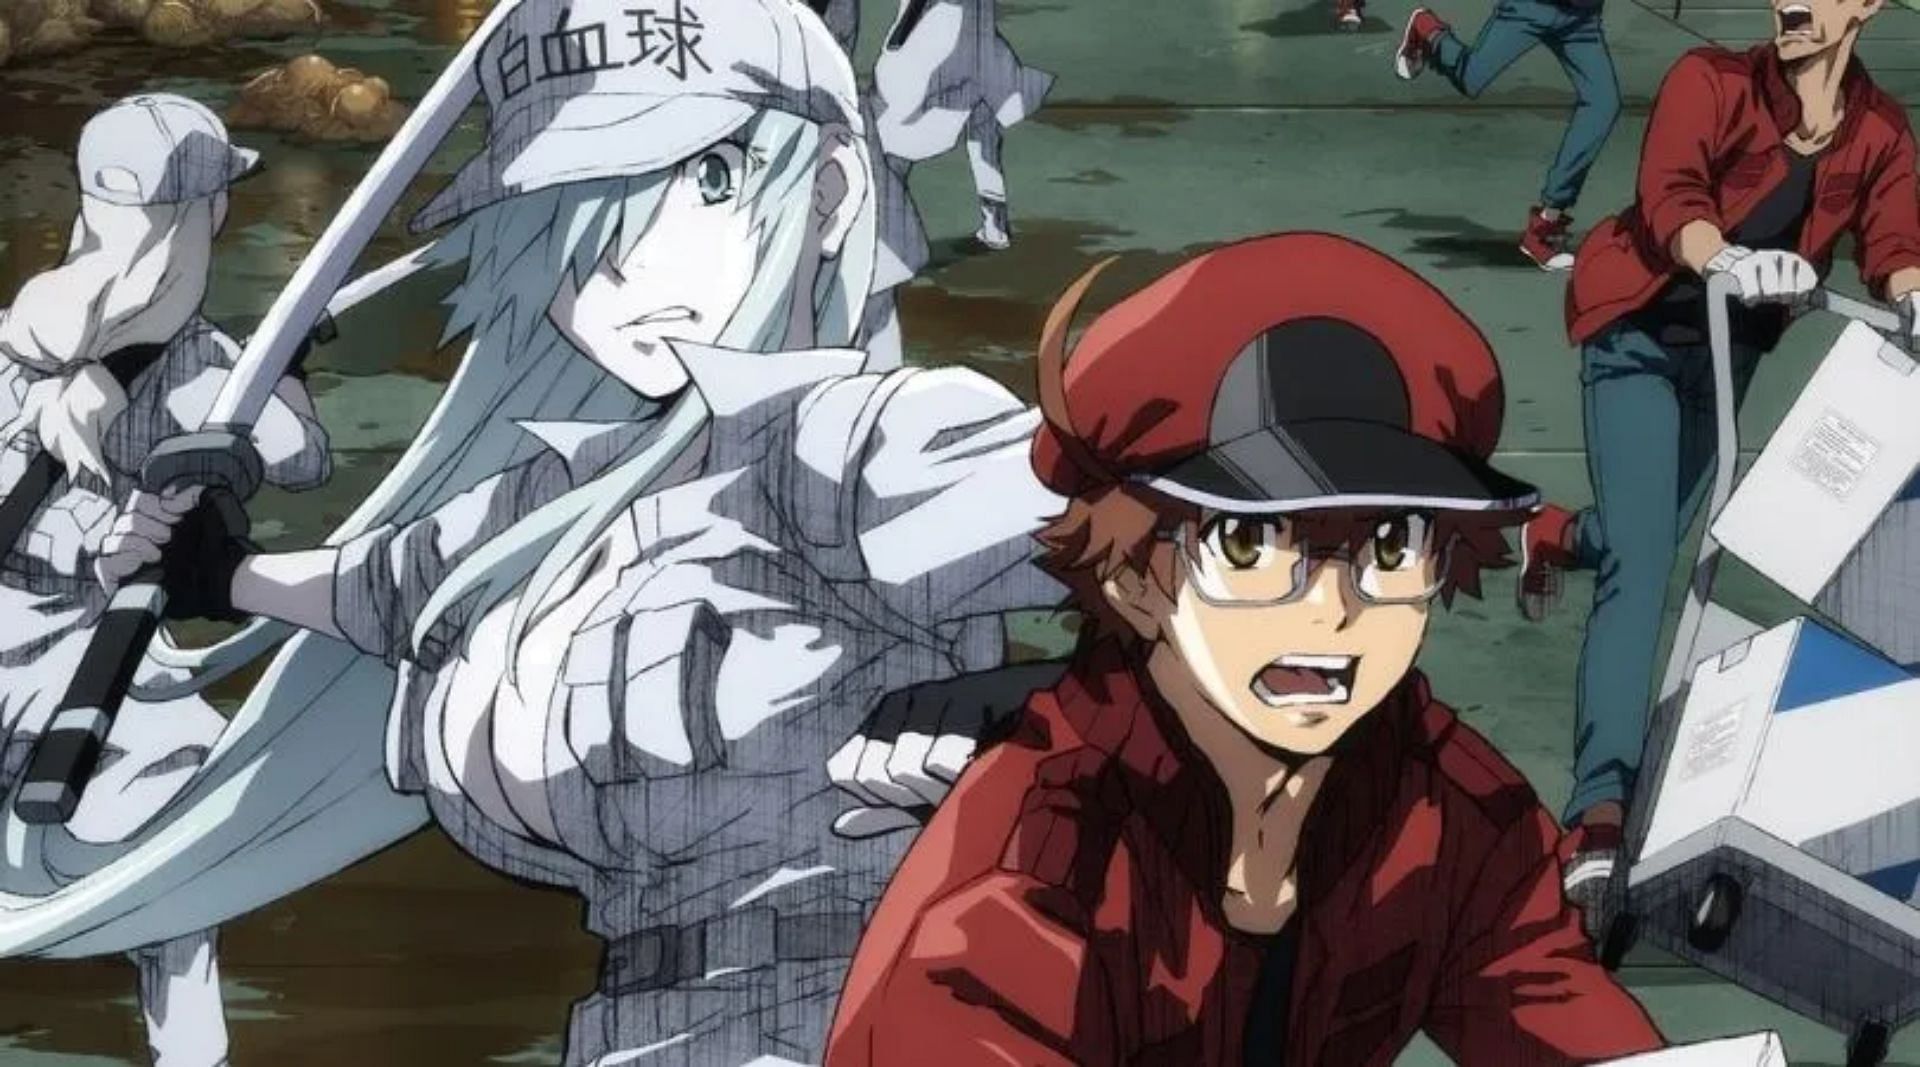 AA2153 and U-1196 from Cells at Work: Code Black (Image via Liden Films)